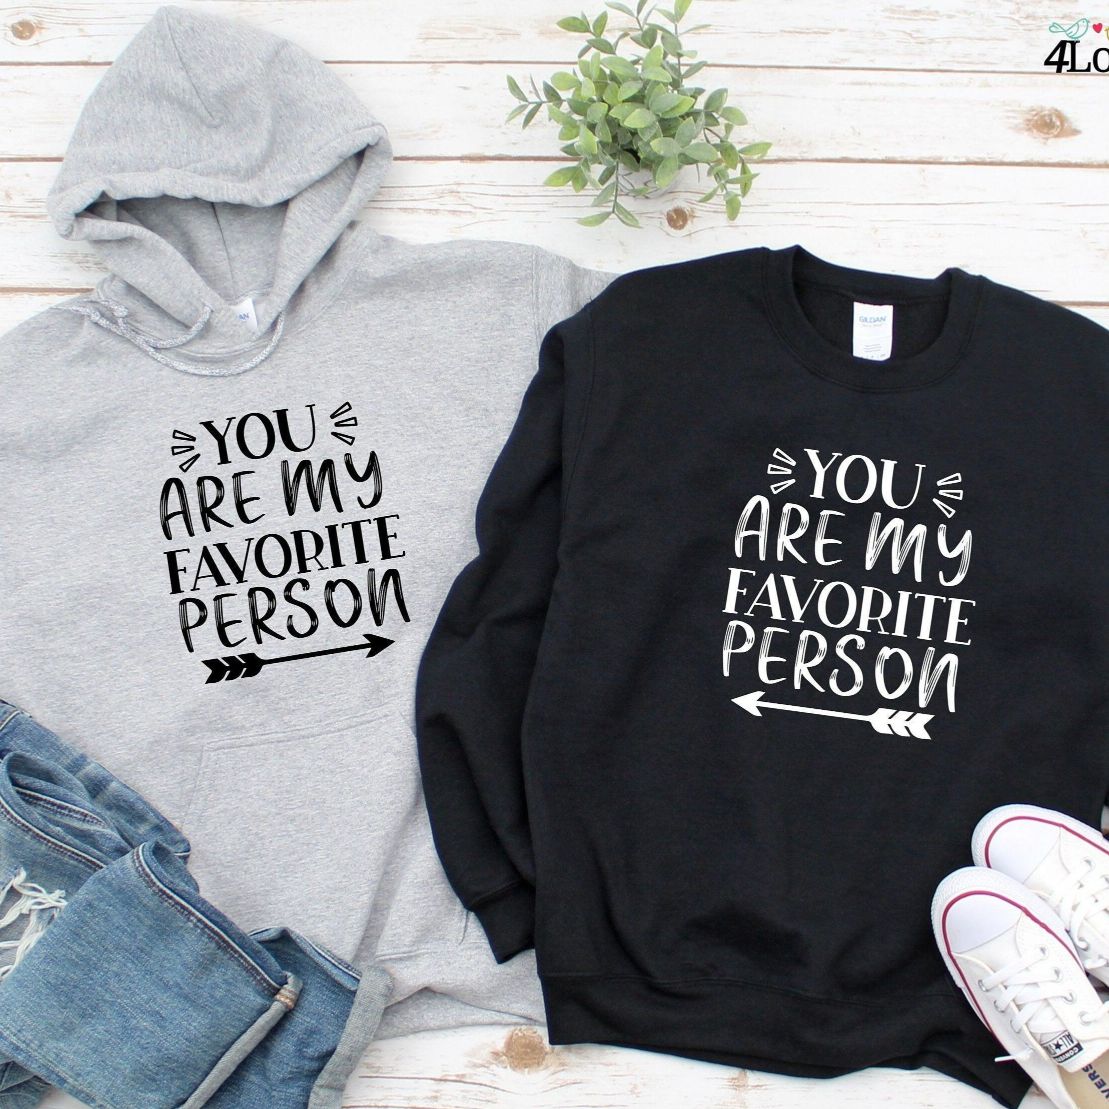 Favorite Person Matching Outfits Set for Couples - Ideal Valentine's Day Gift